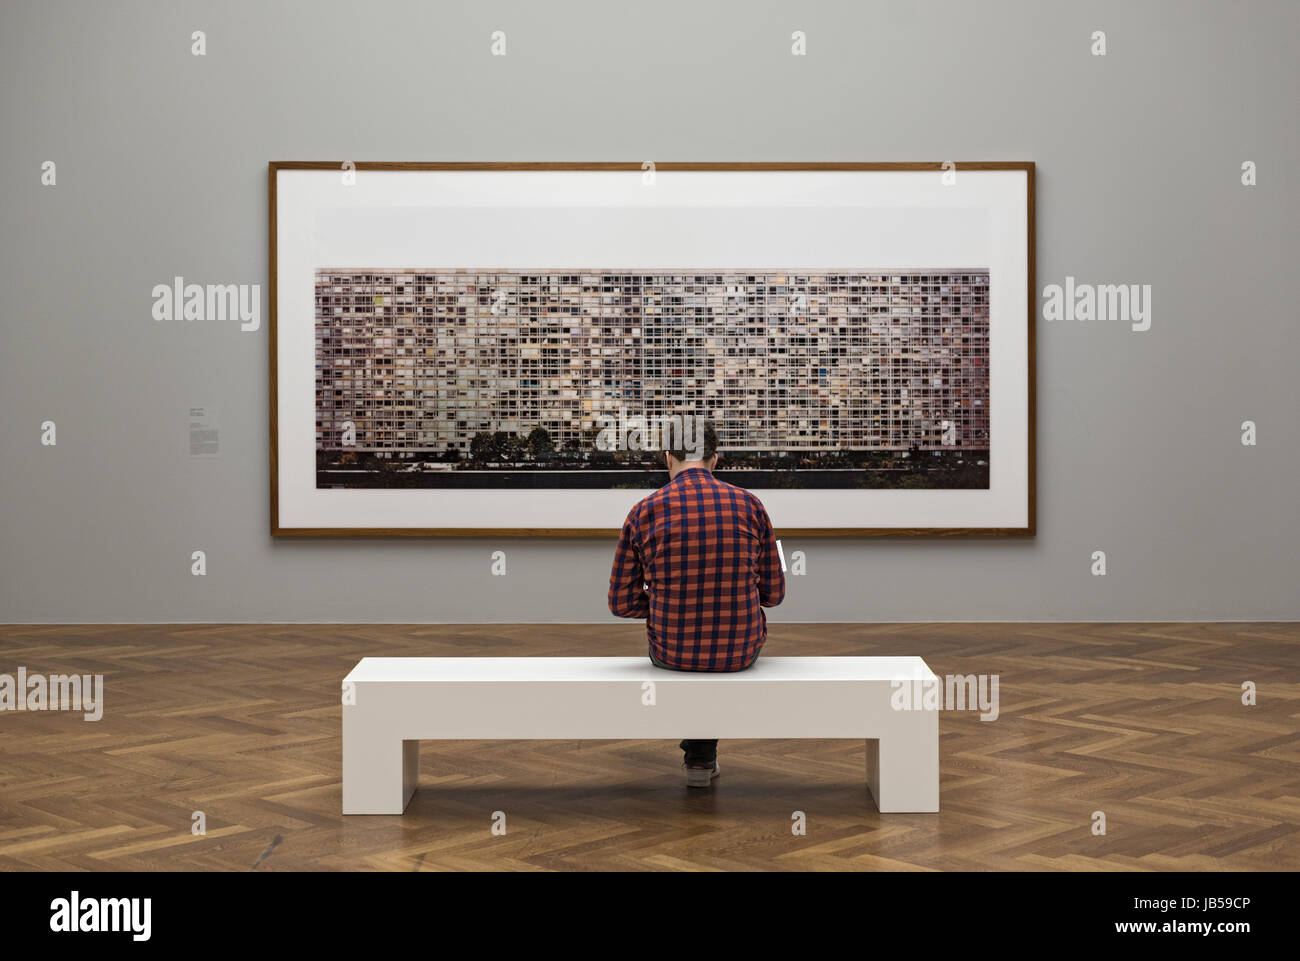 Visitor of an exhibition at the staedel art museum, Frankfurt, Germany Stock Photo